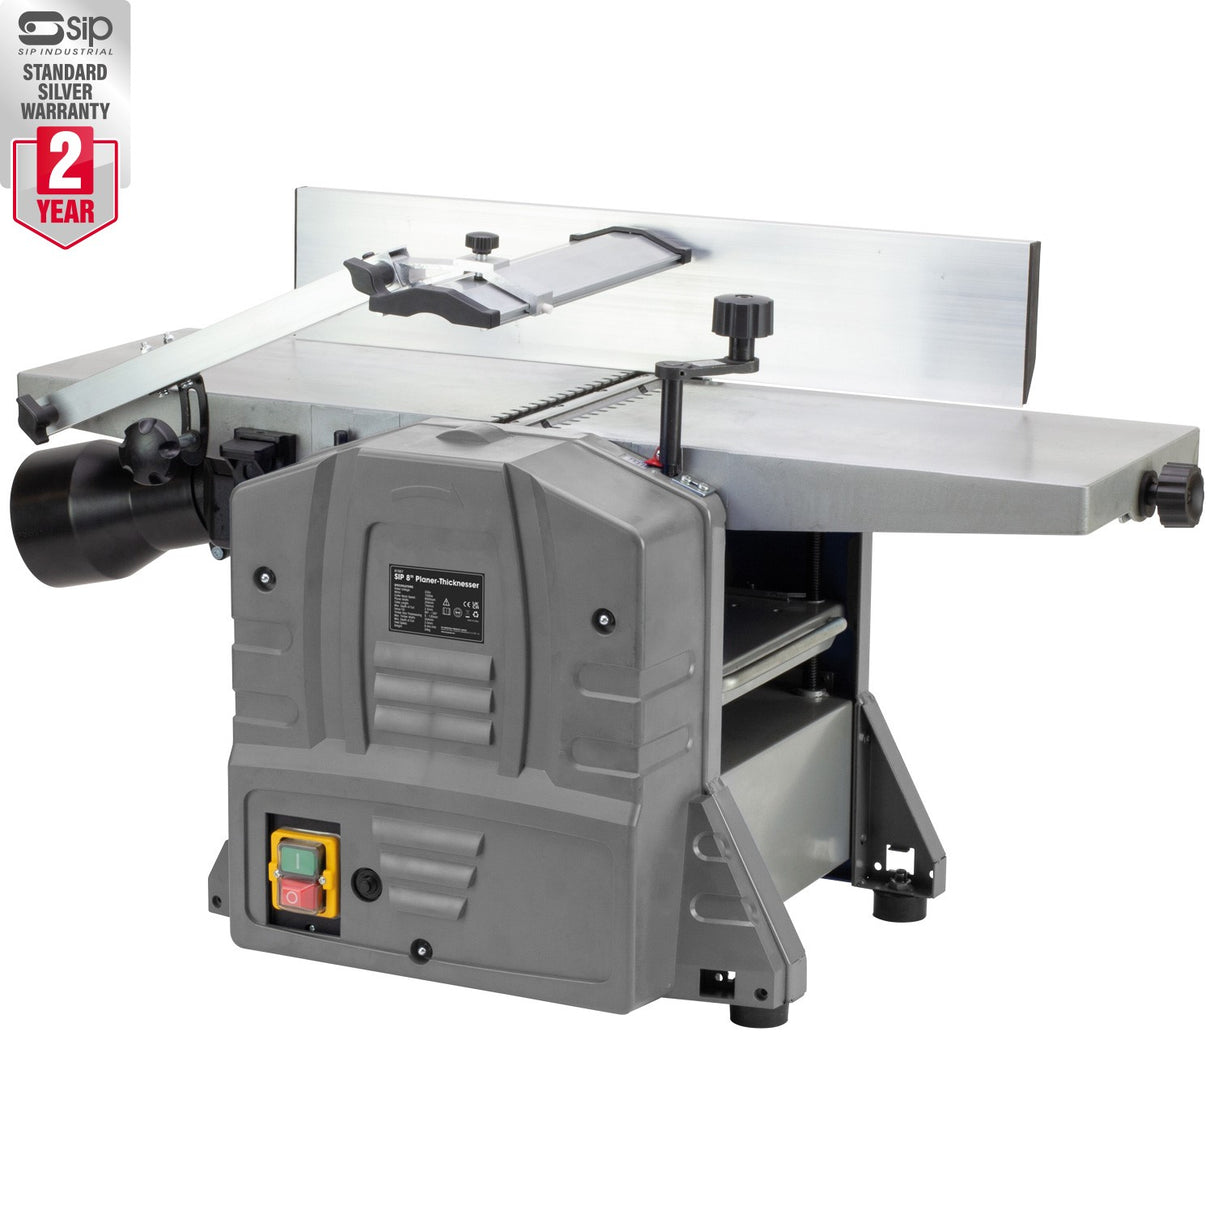 SIP 8IN X 5IN PLANER THICKNESSER